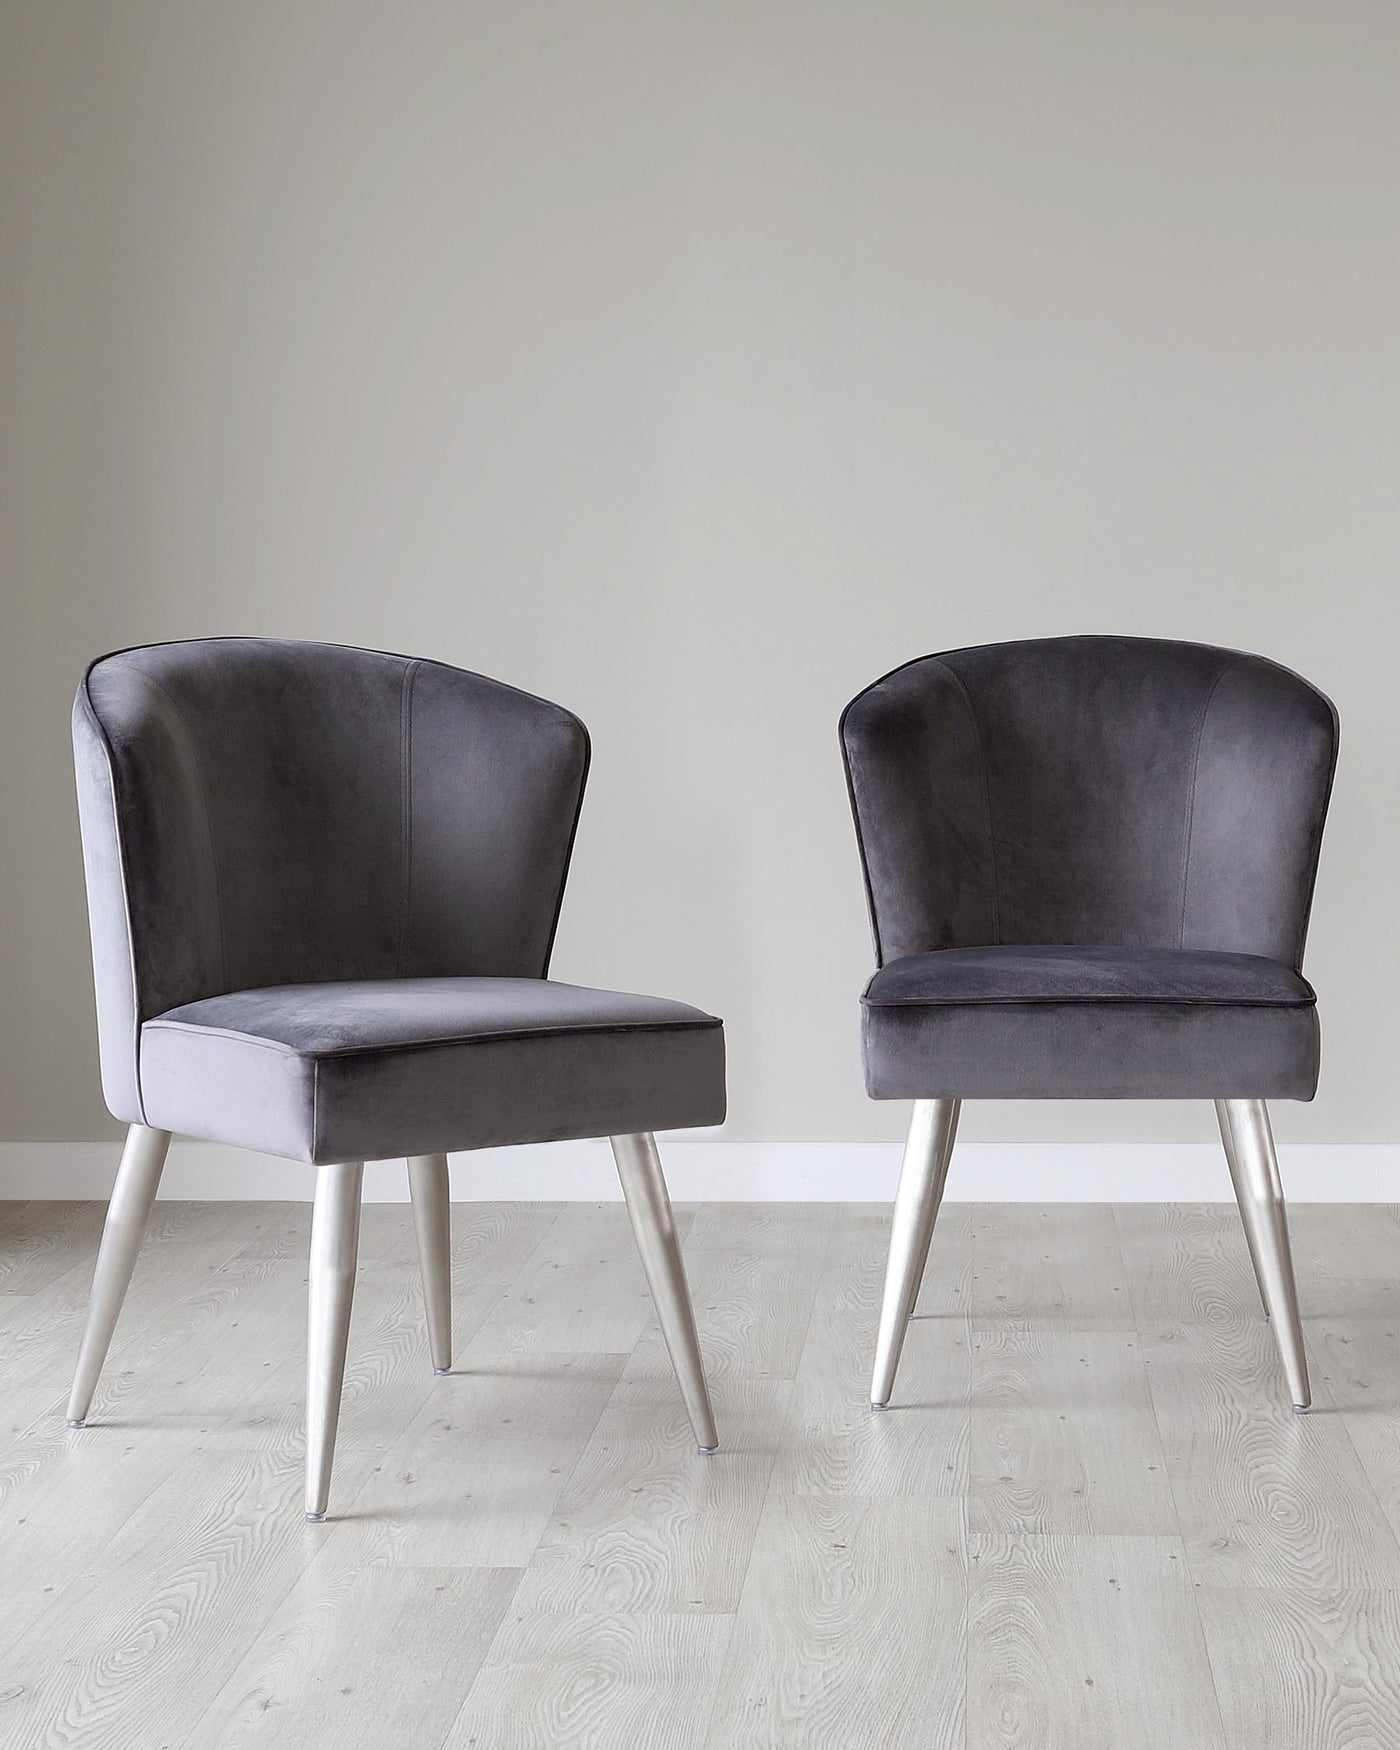 Two contemporary velvet dining chairs with high, rounded backrests and silver metal tapered legs on a light wood floor against a neutral wall background.